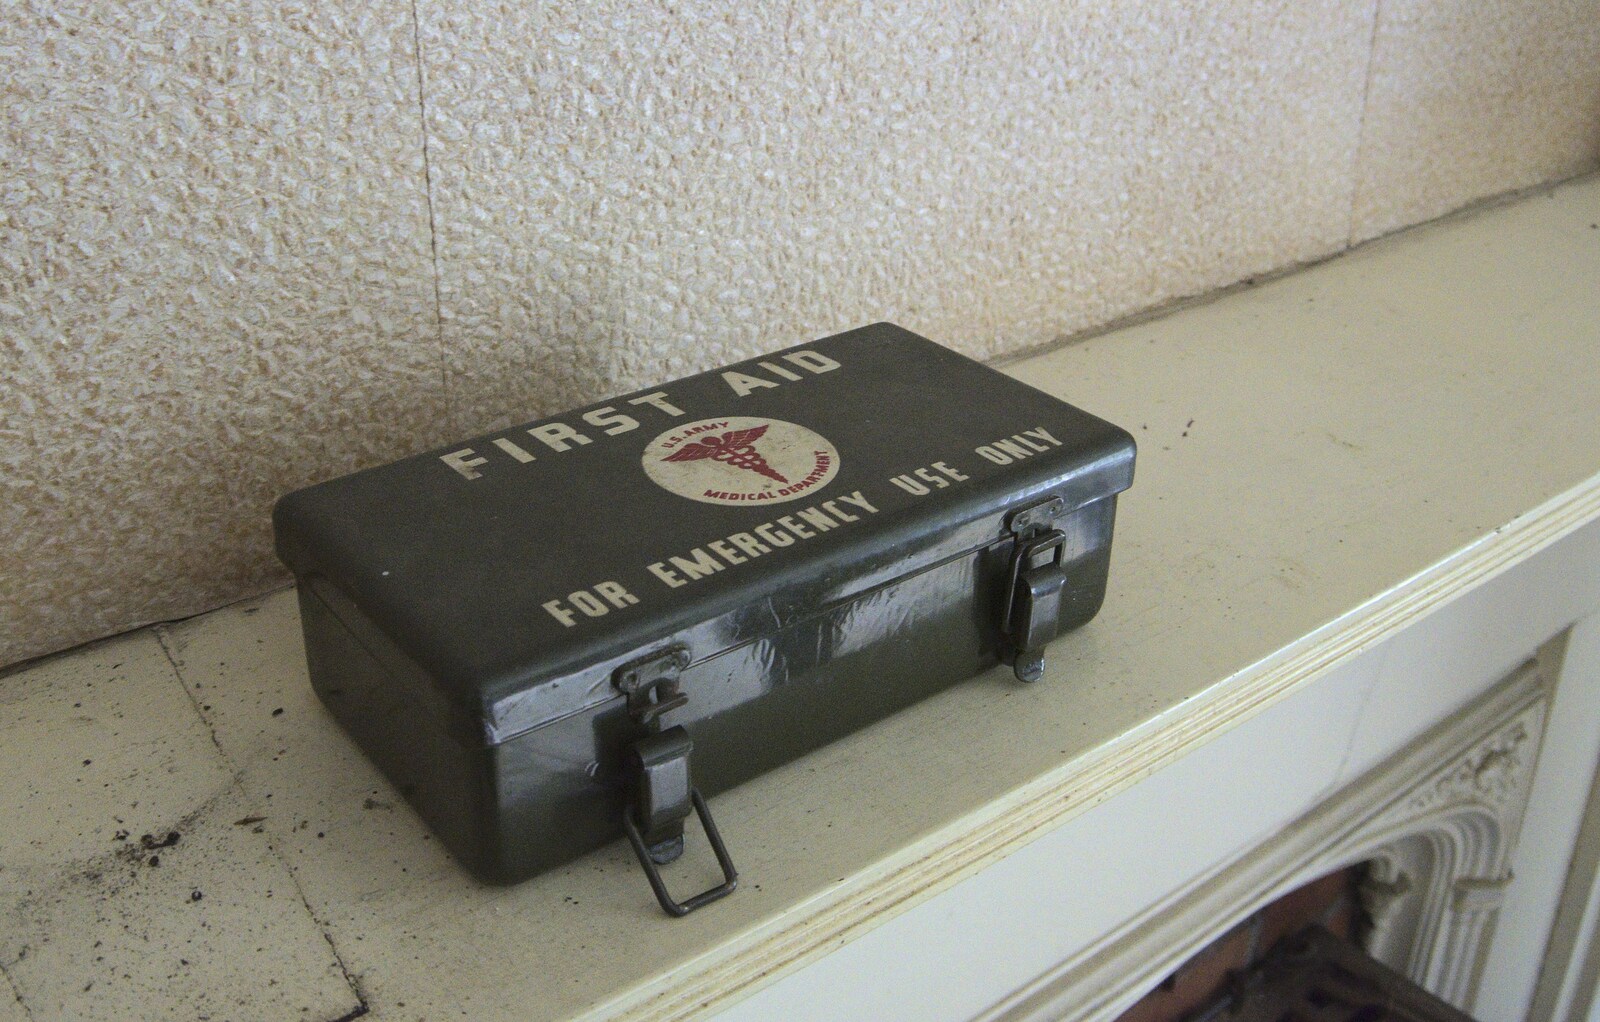 An original US Army Medical Department box from A 1940s Timewarp, Site 4, Bungay Airfield, Flixton, Suffolk - 9th June 2022